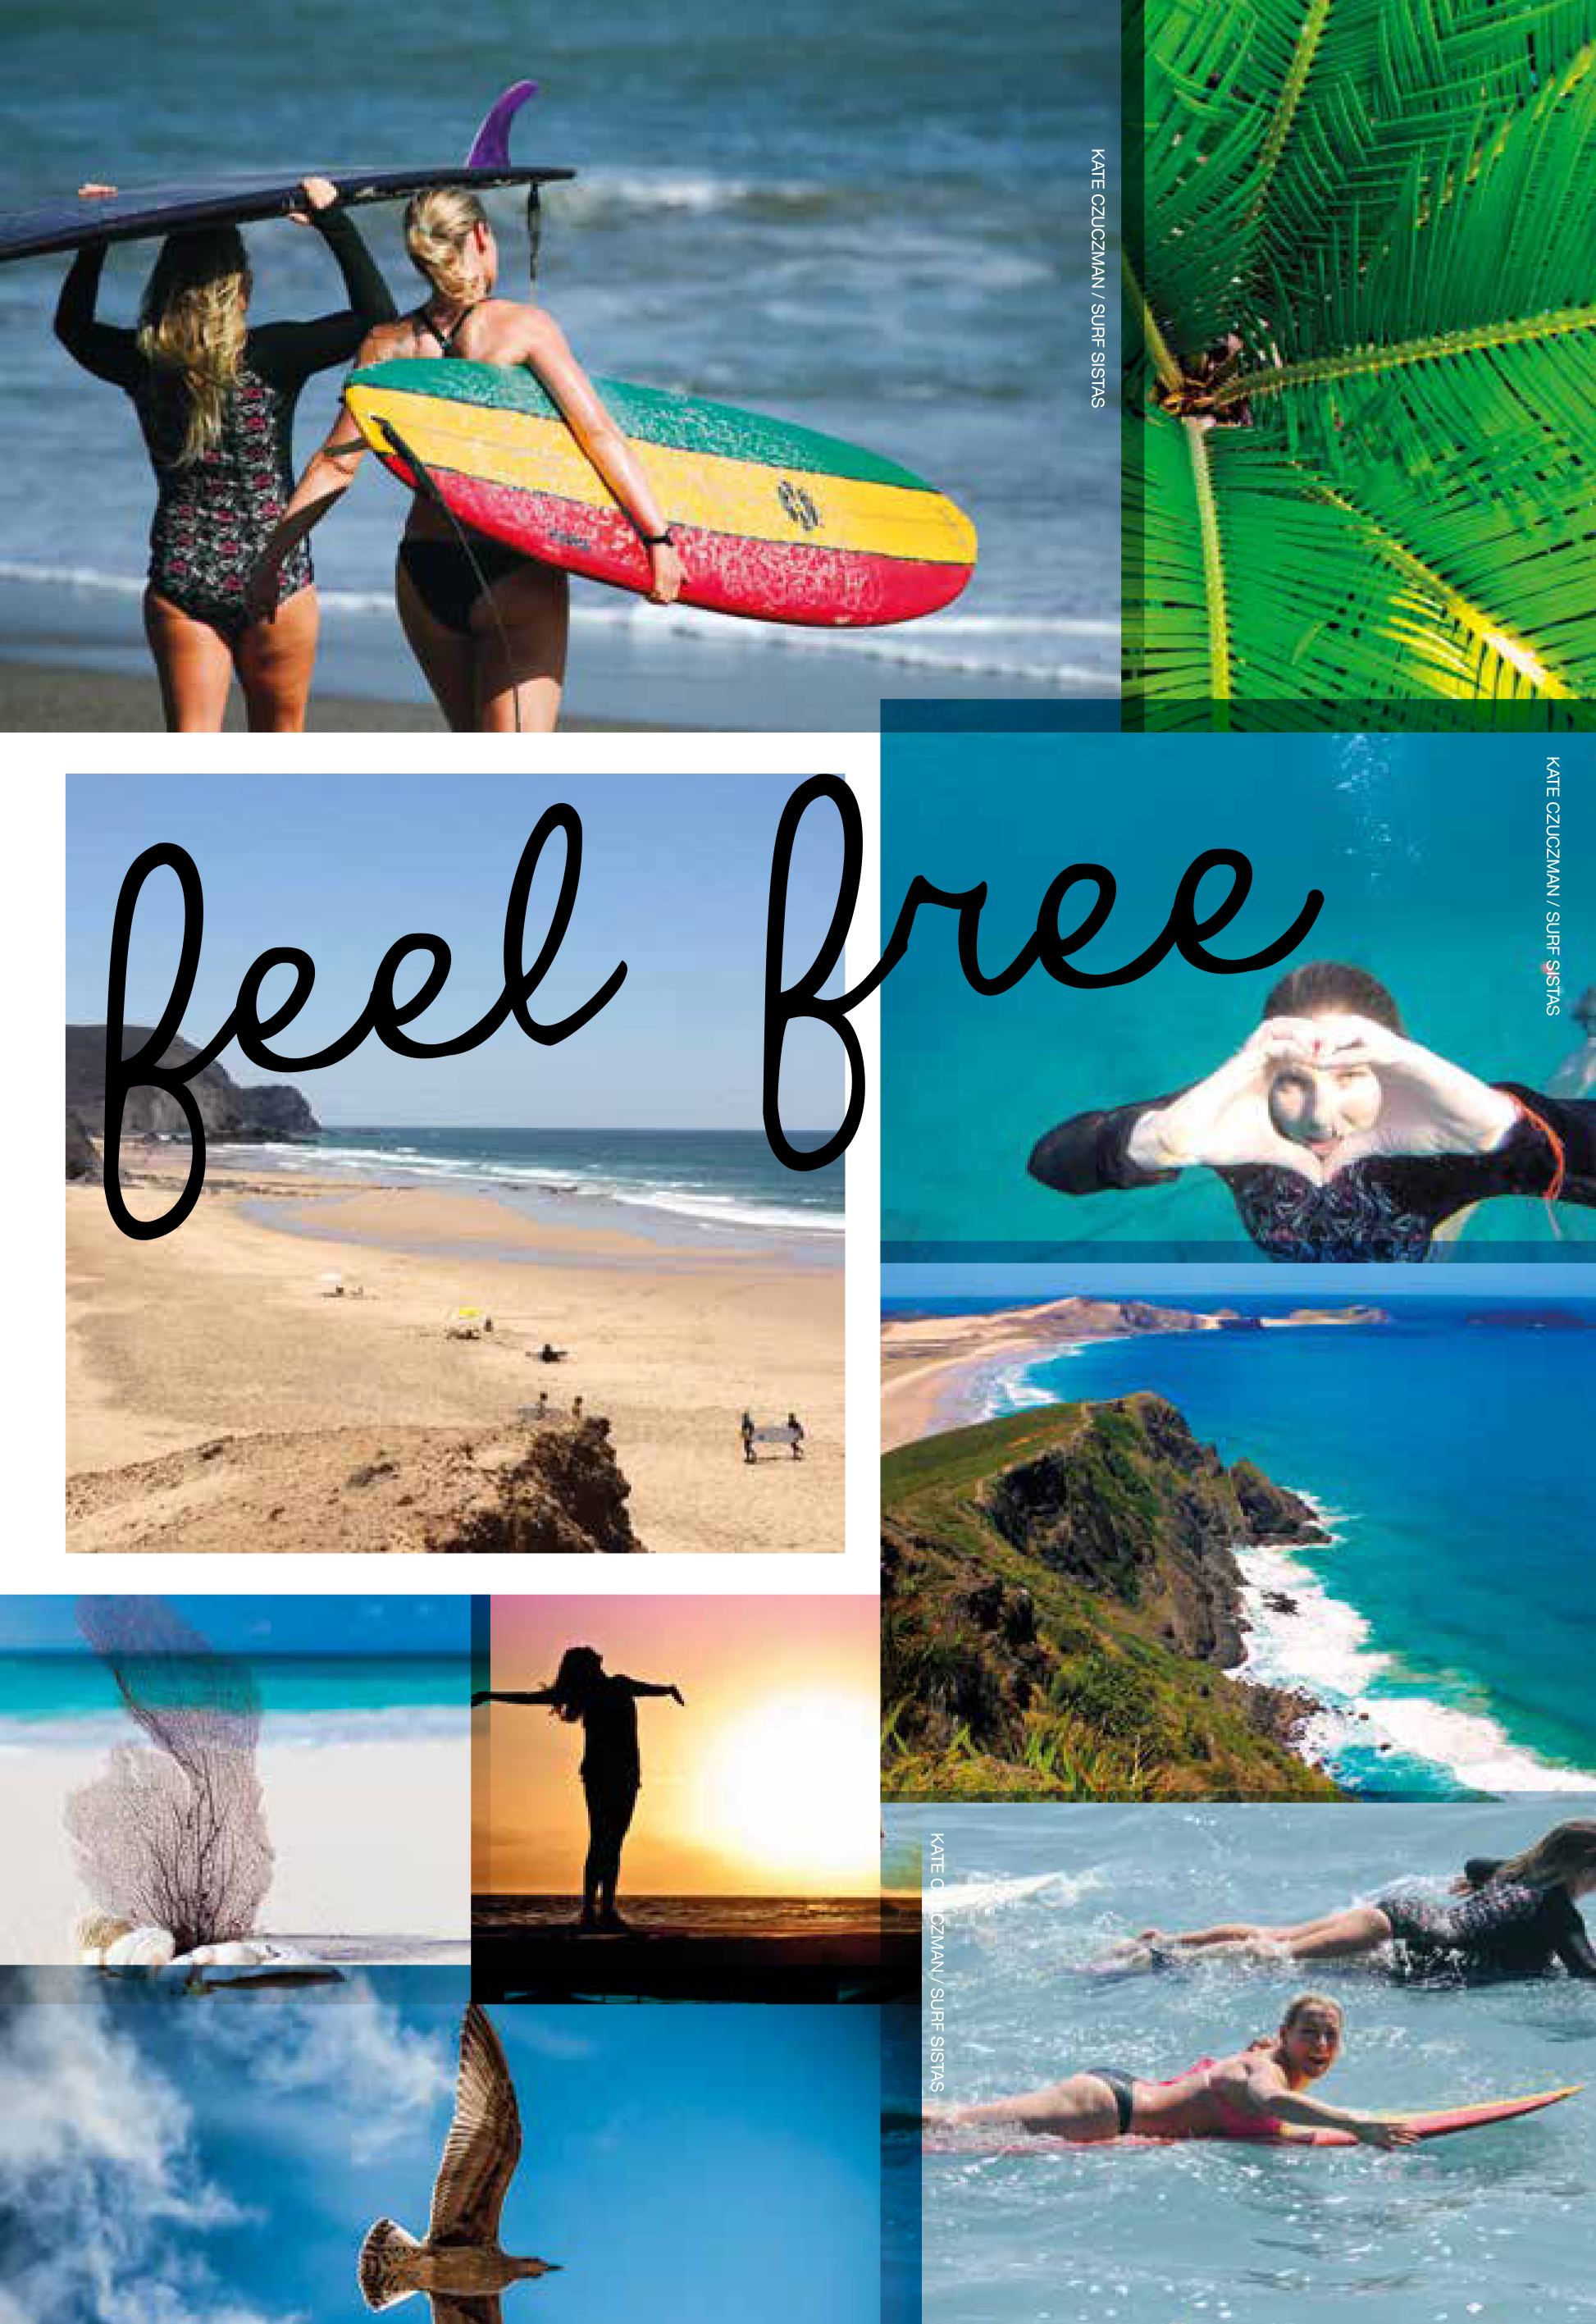 Surfgirl Magazine - Travel Guide - Feel Free with Surf Sistas images